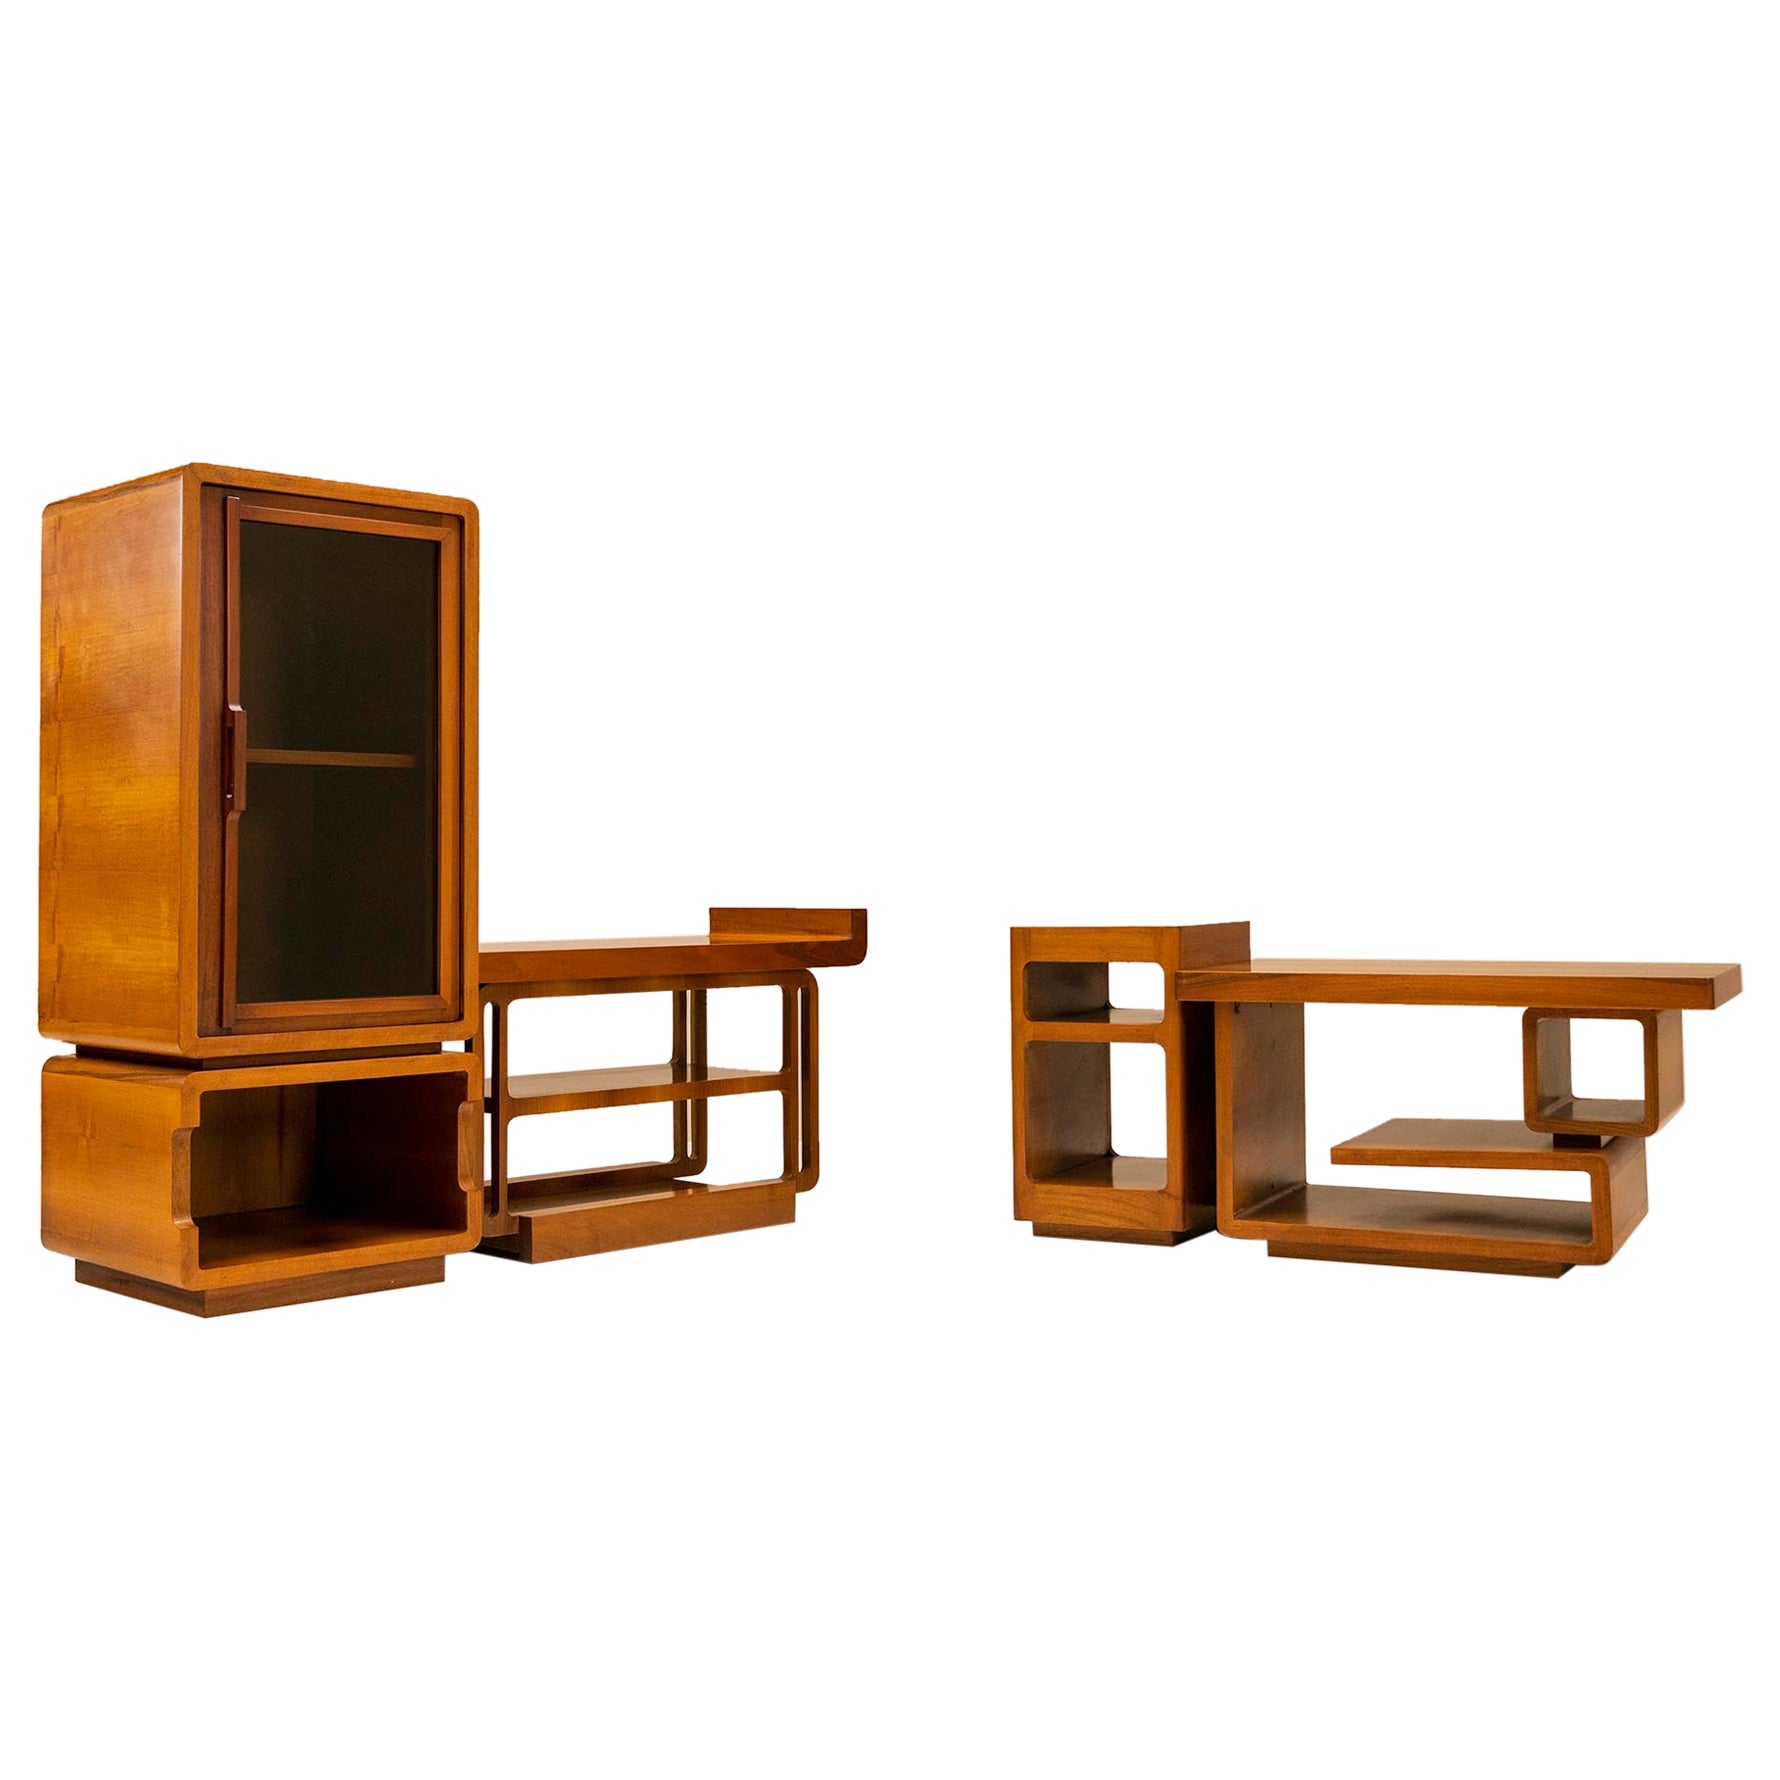 Modernist Showcase Cabinet and Coffee Table in Walnut, Italy, 1960s